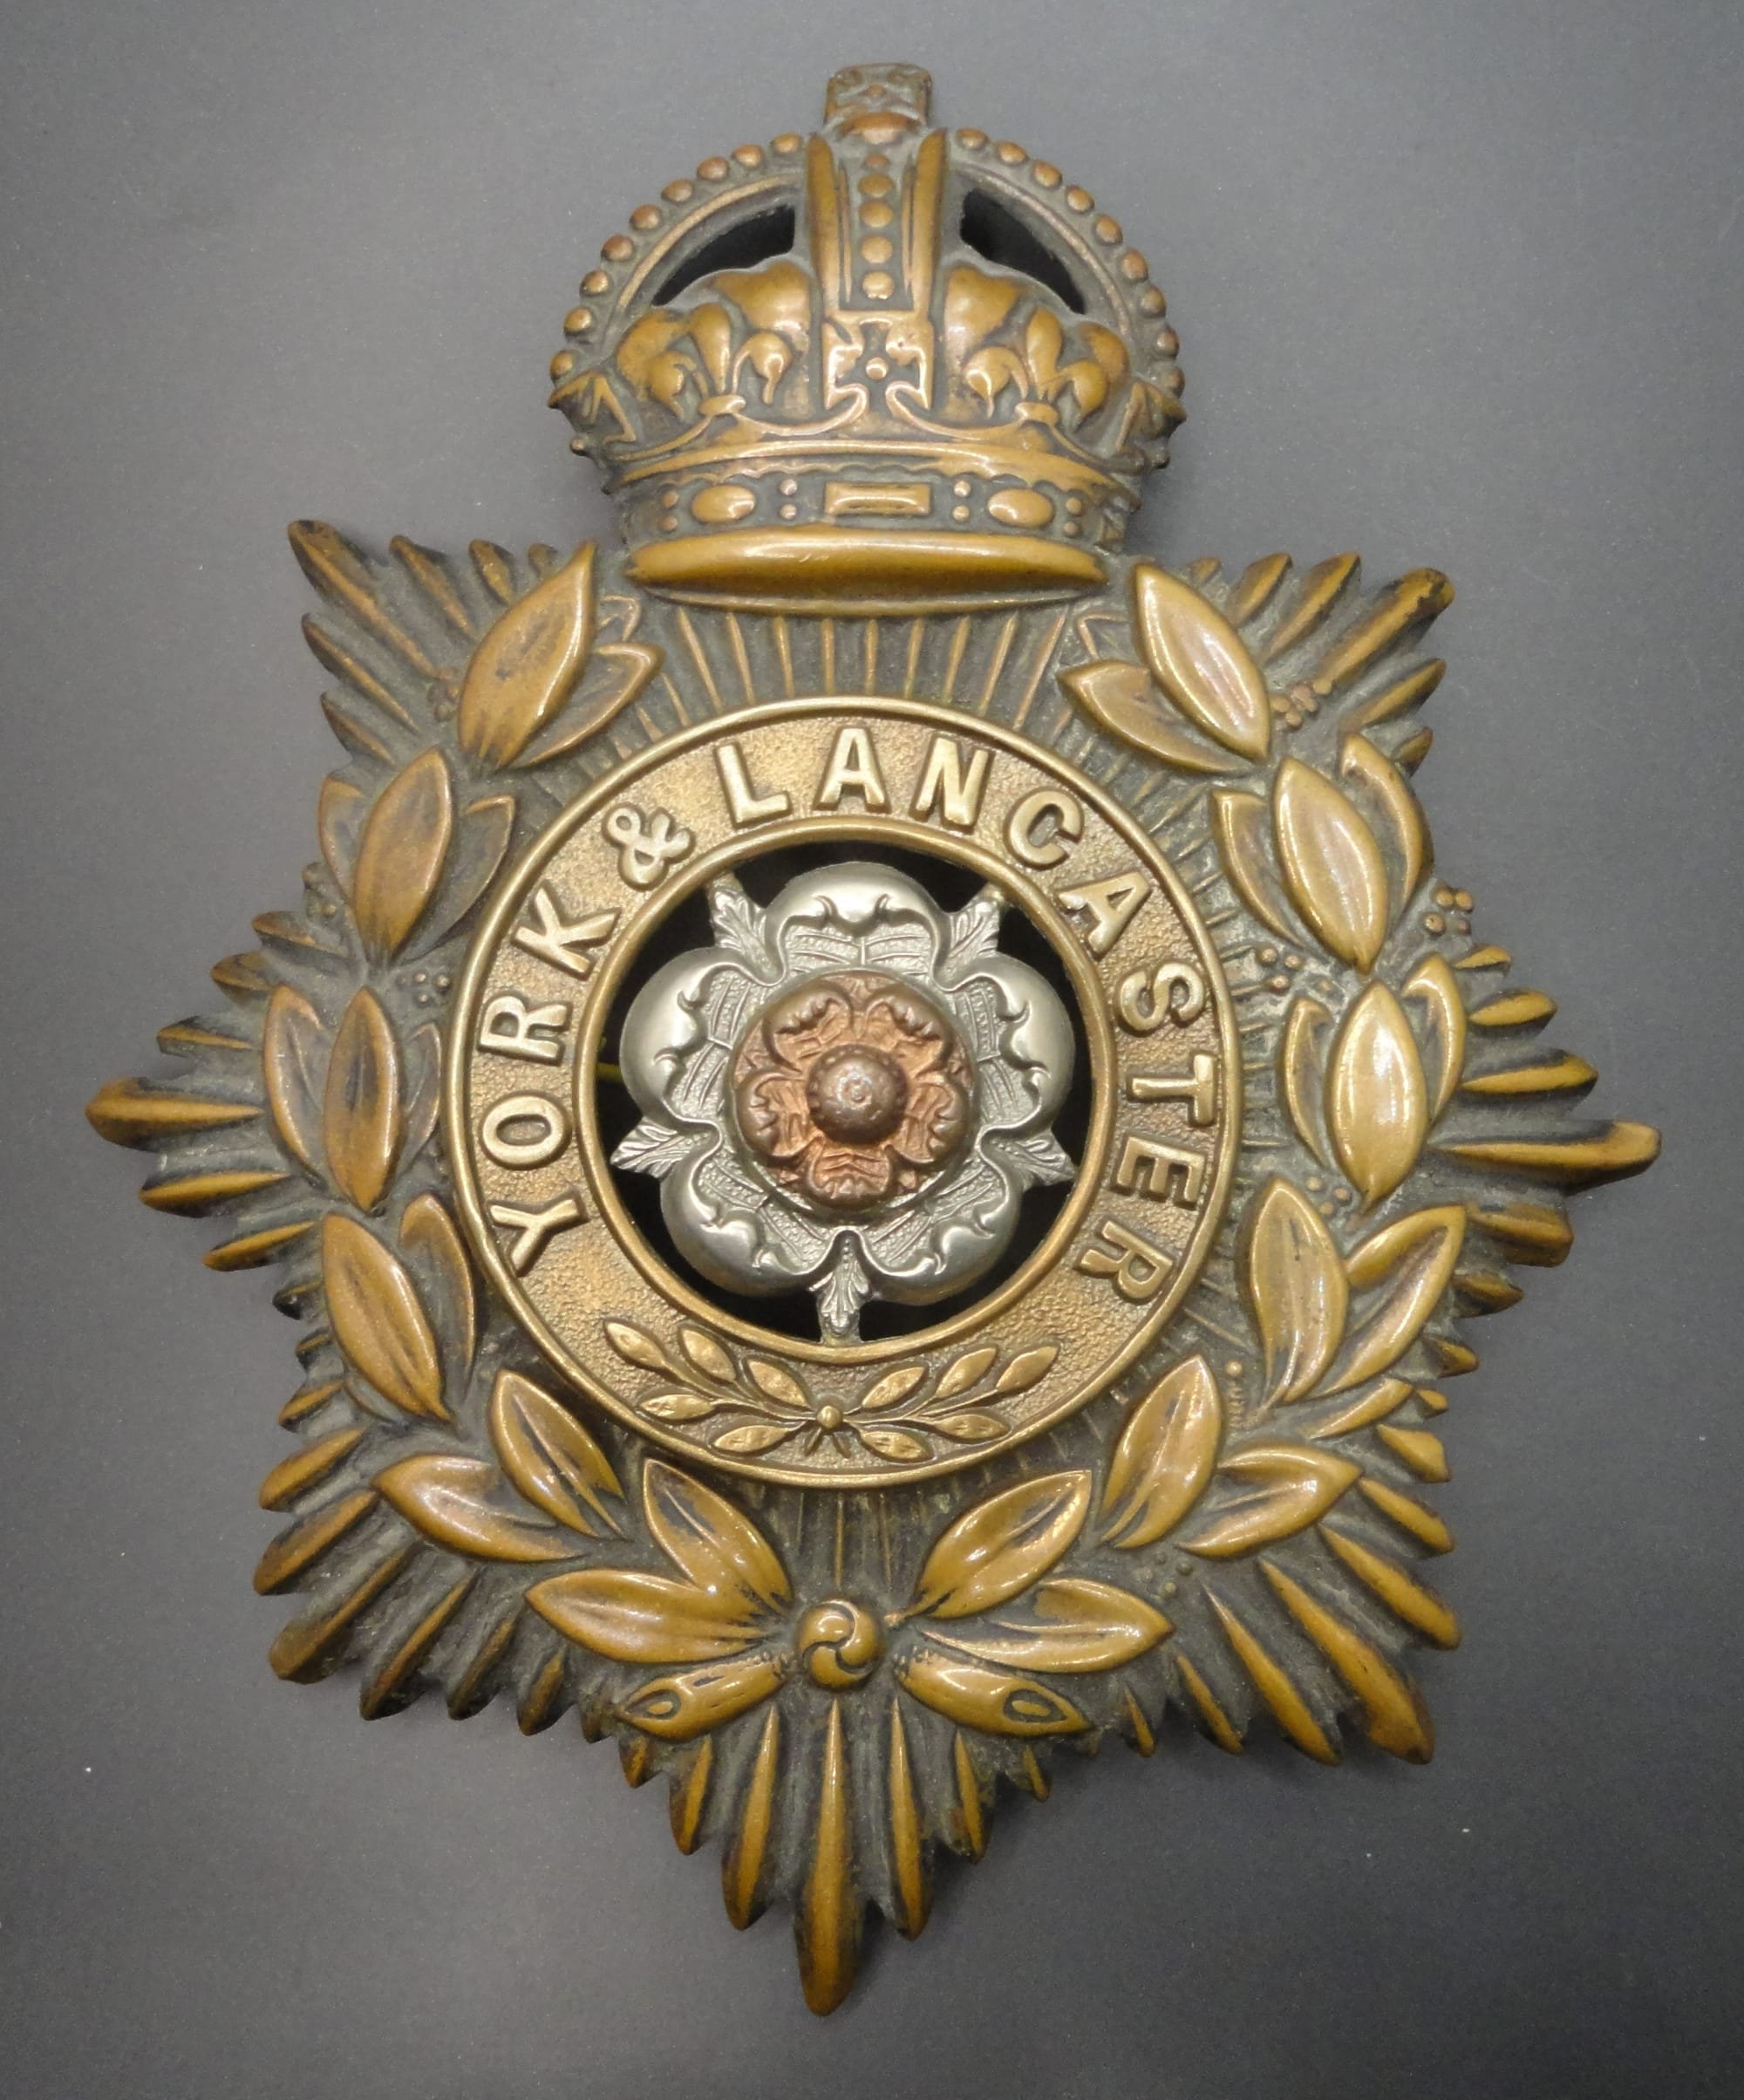 Other Ranks Helmet Plate 1902 to 1914